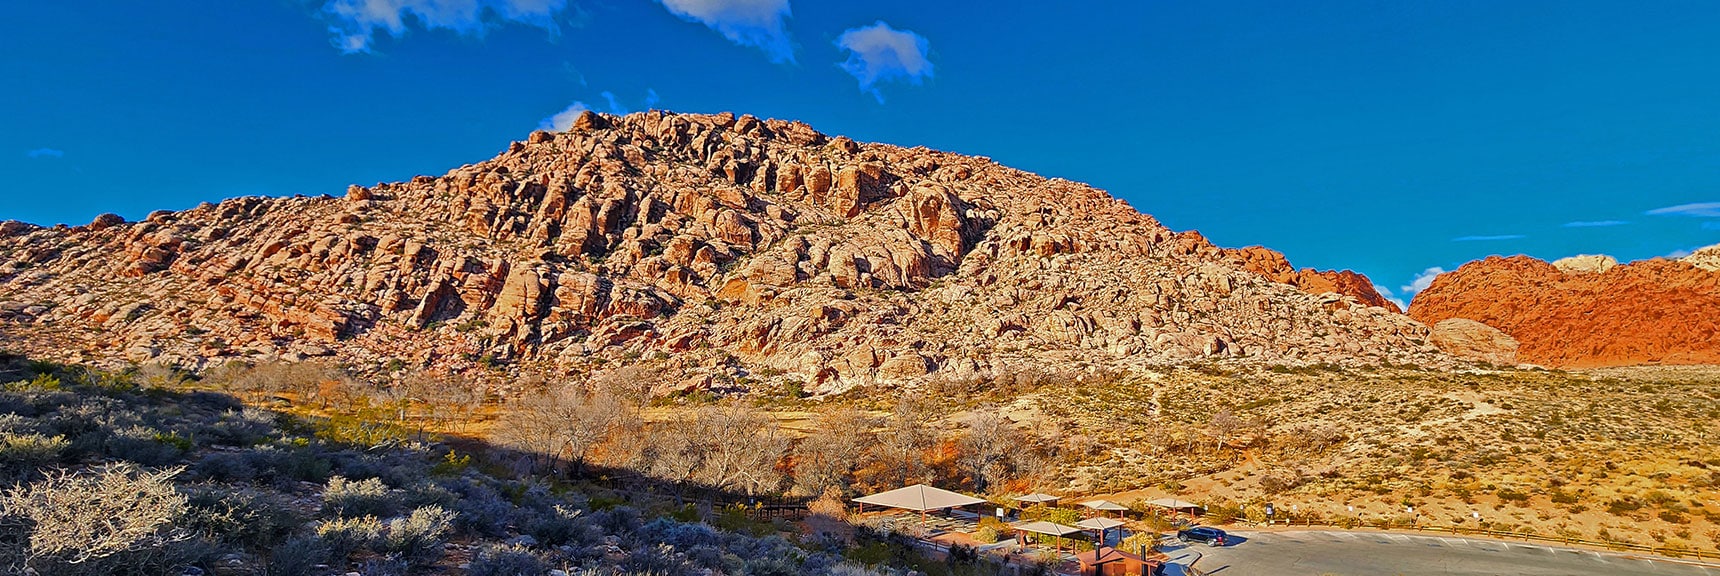 You're Going to Skirt the Calico Hills East Side Toward the Red Hills Ahead | Lower Calico Hills Loop | Calico Basin & Red Rock Canyon, Nevada